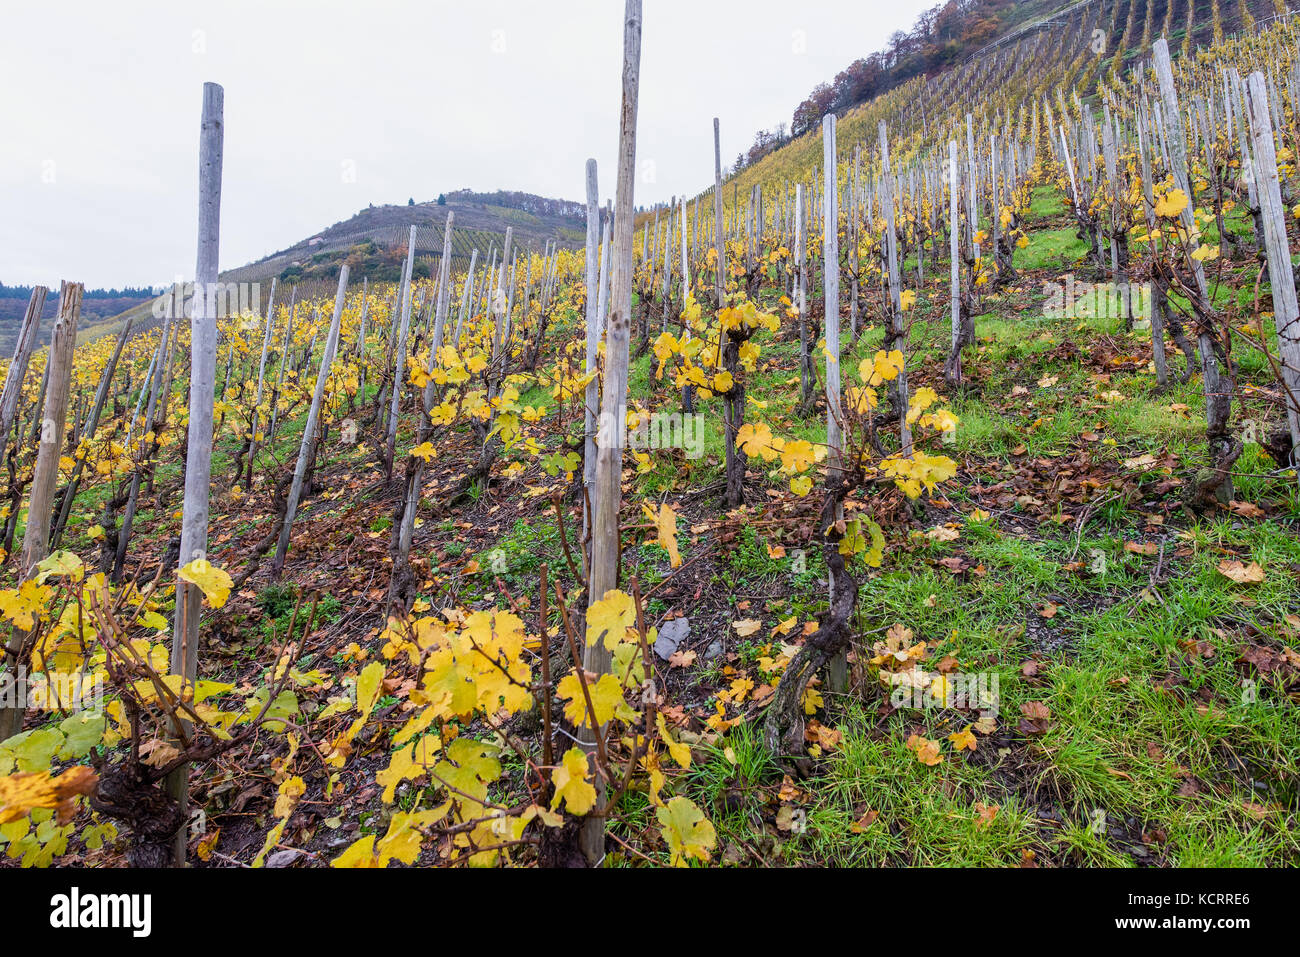 German wine industry: old vines at Maximiner Herrenberg, Longuich, Mosel, Germany Stock Photo